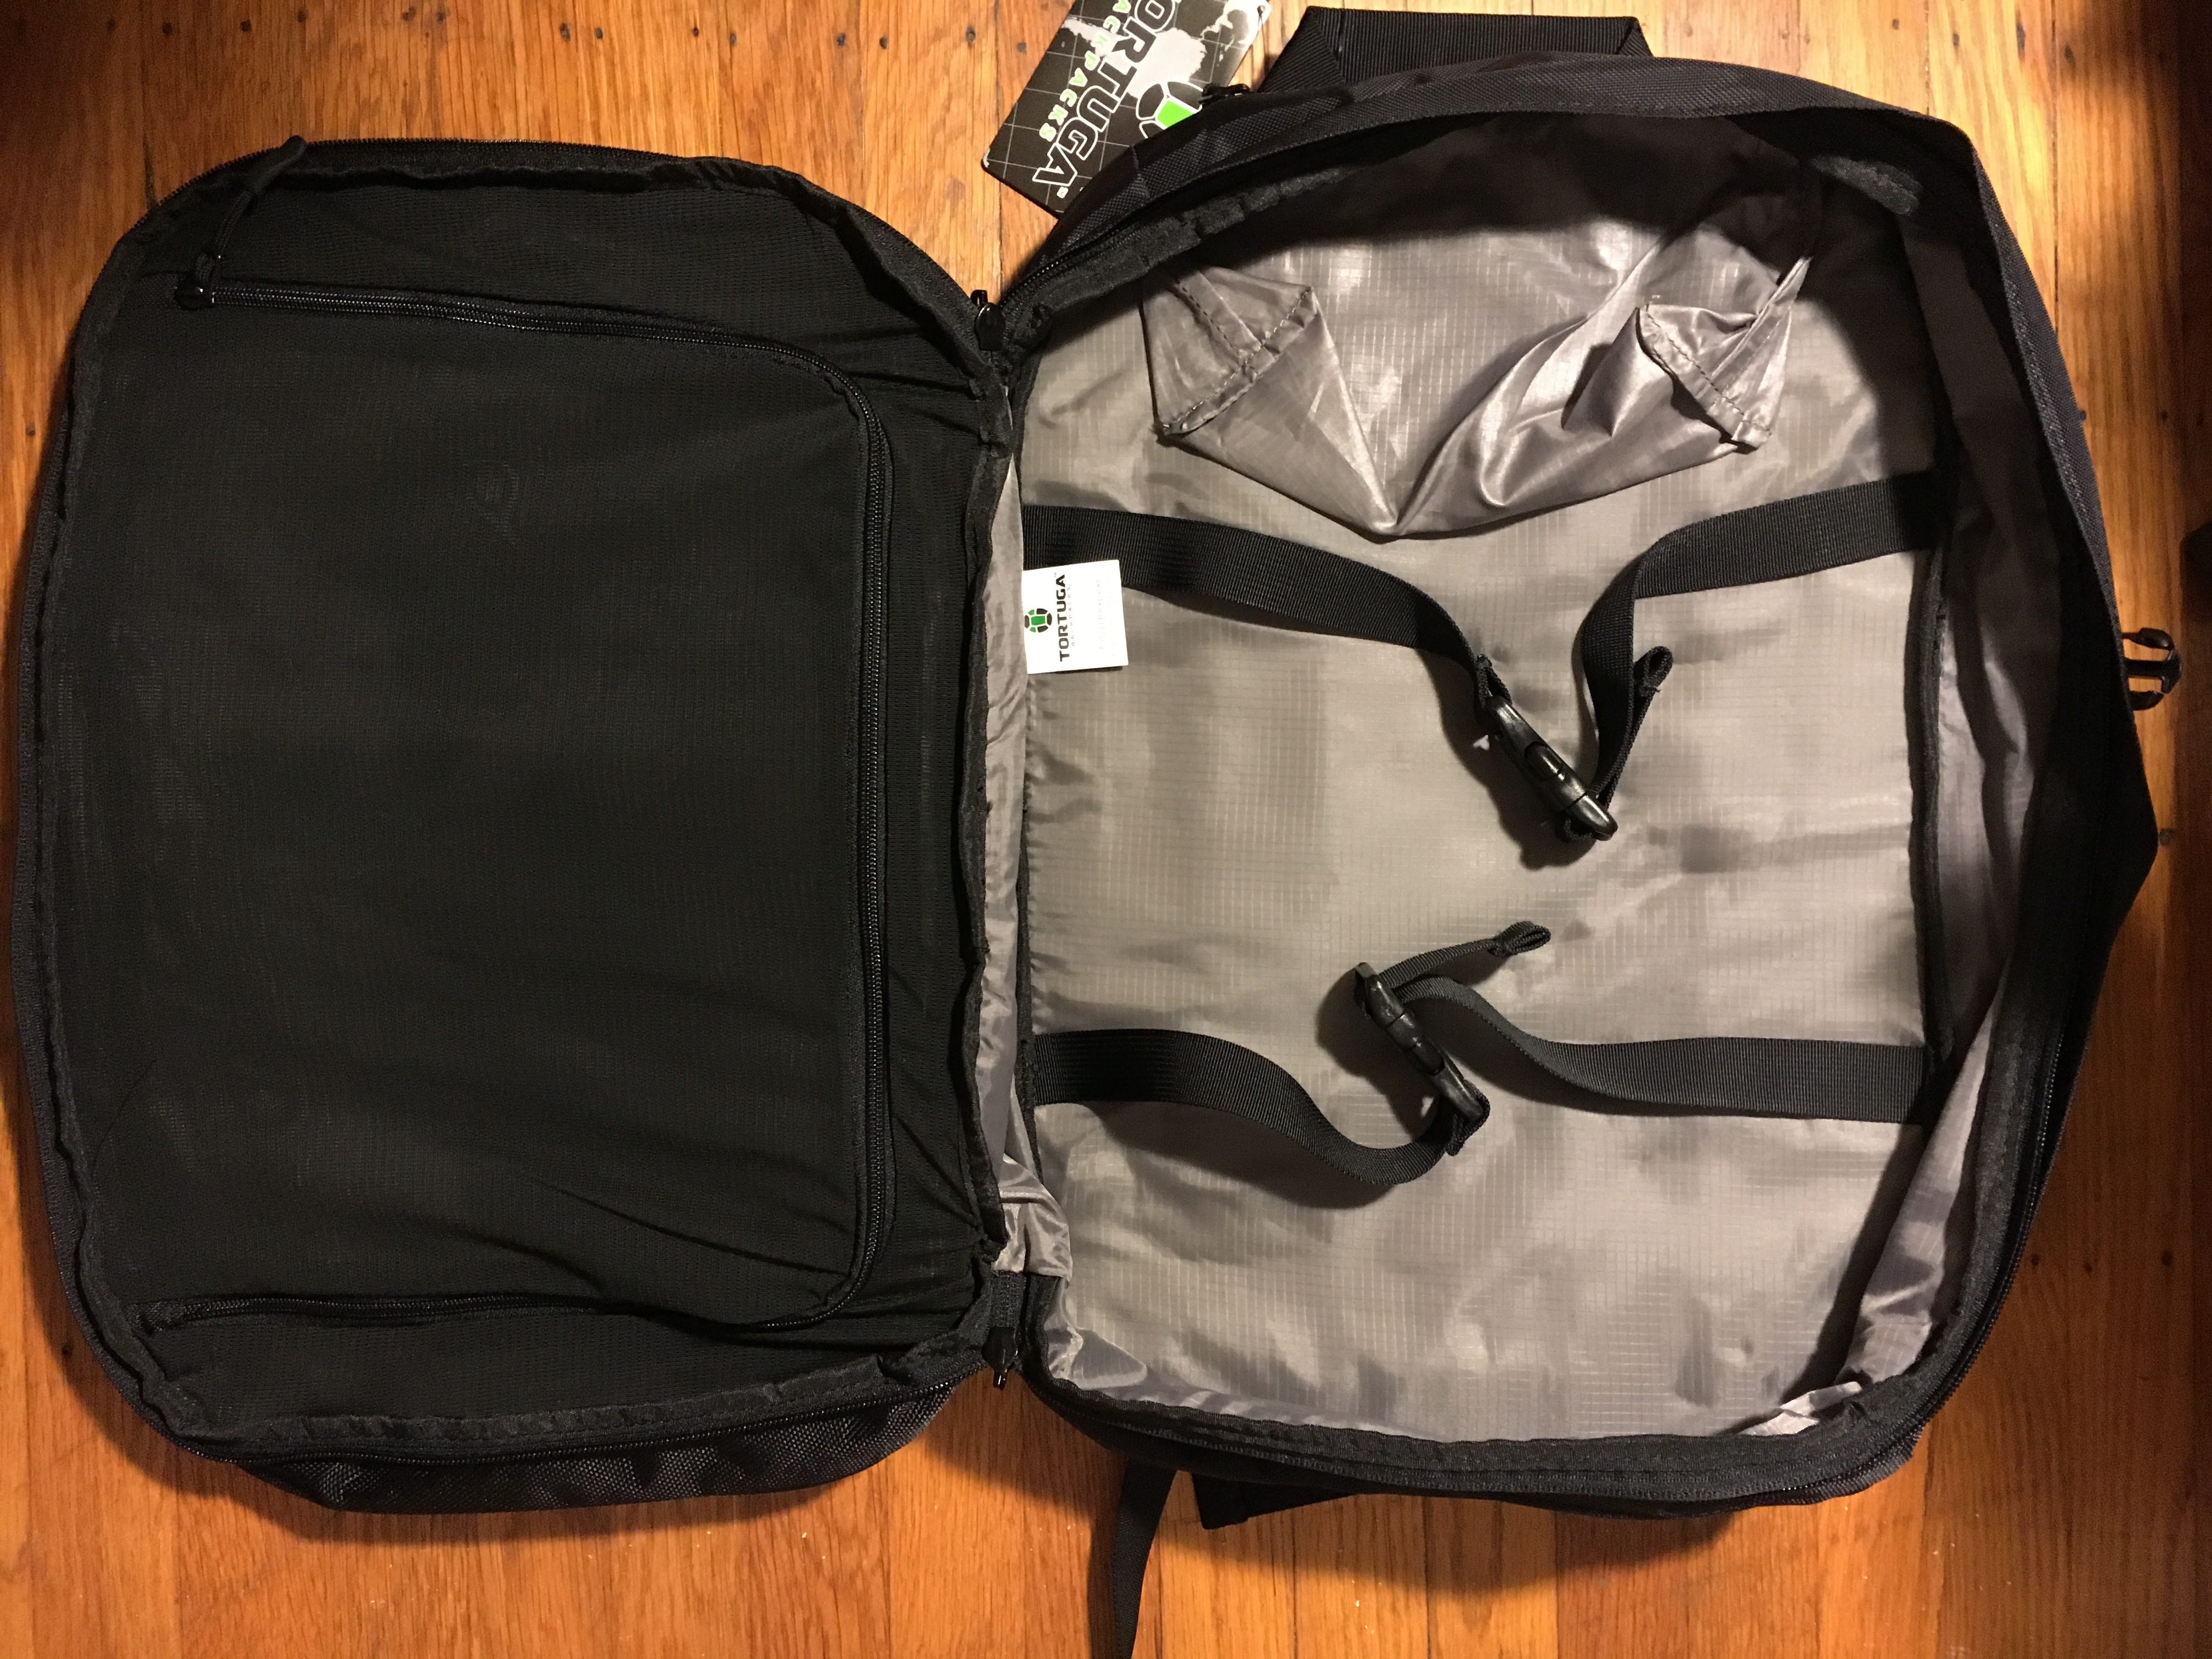 How to Pack a Duffle Bag for Travel - Tortuga